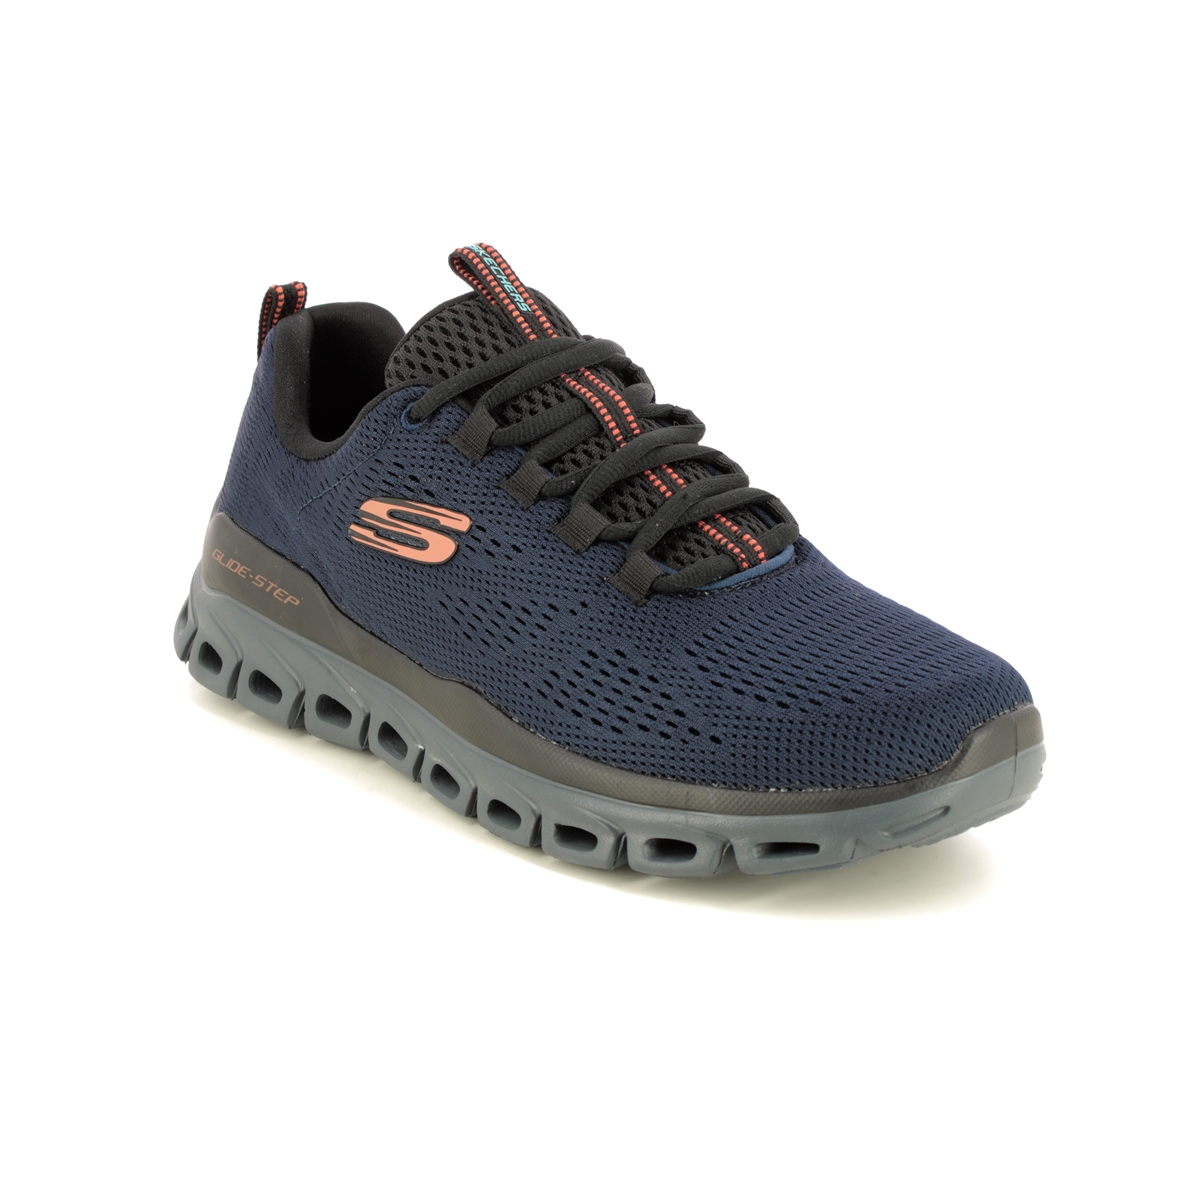 Skechers Glide Step Fast NVBK Navy Black Mens trainers 232136 in a Plain Textile in Size 8